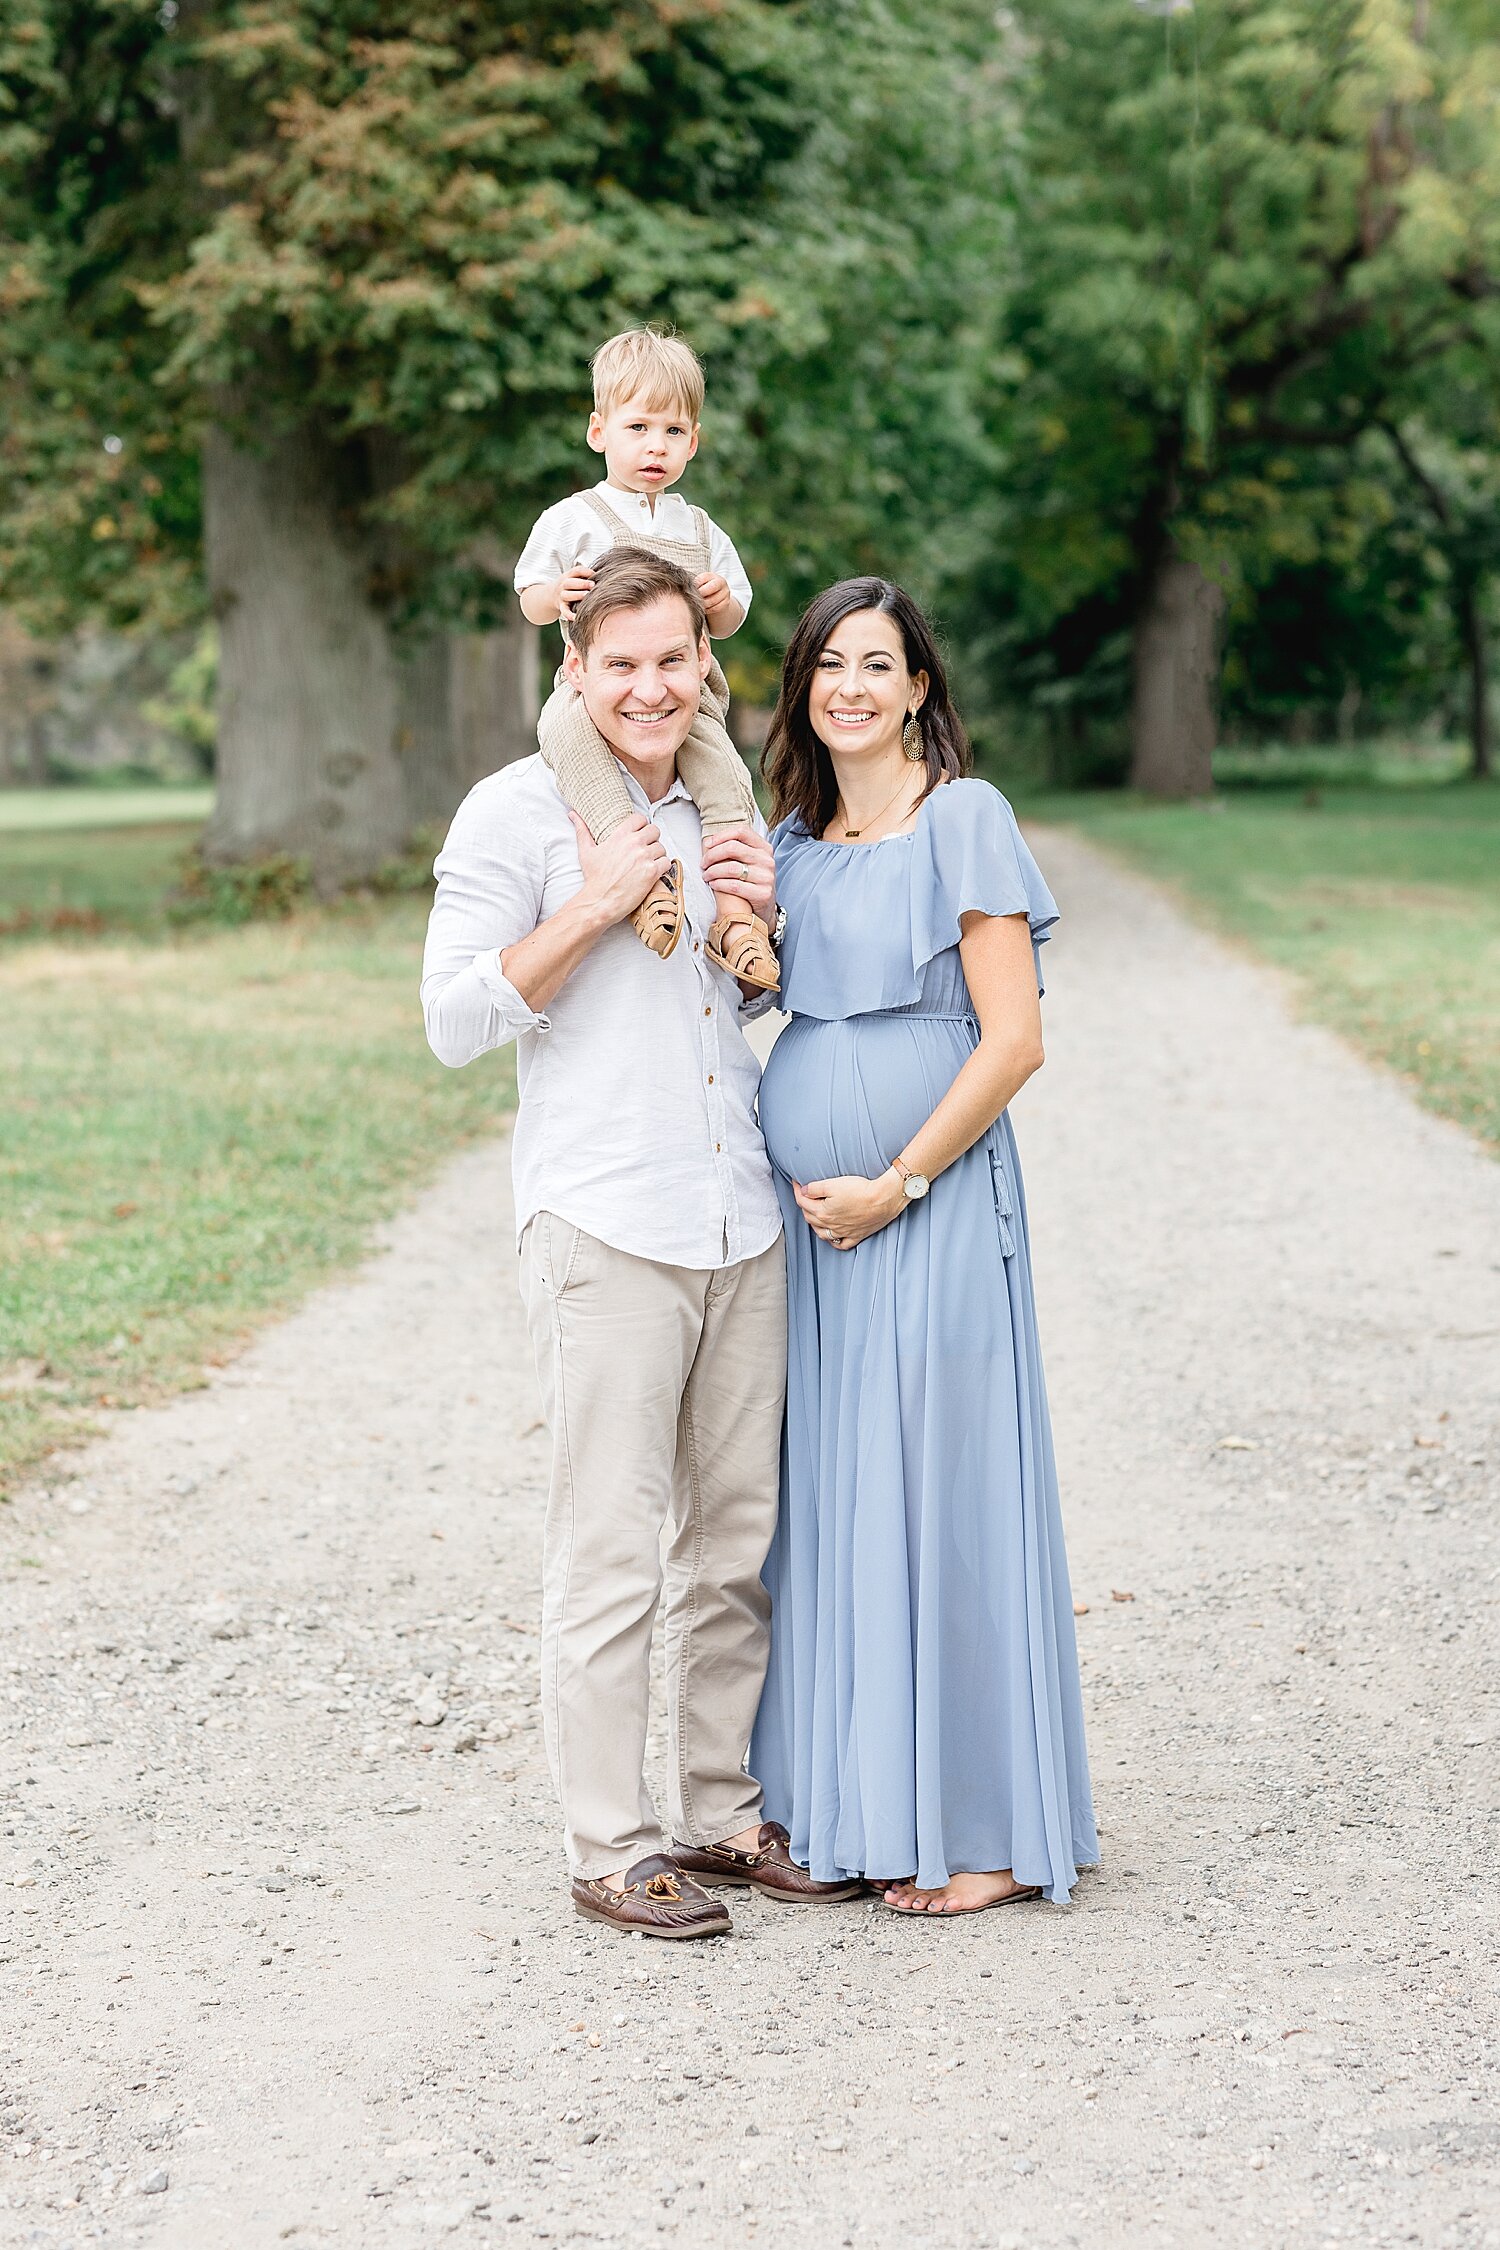 Family photos during maternity photoshoot with Kristin Wood Photography.